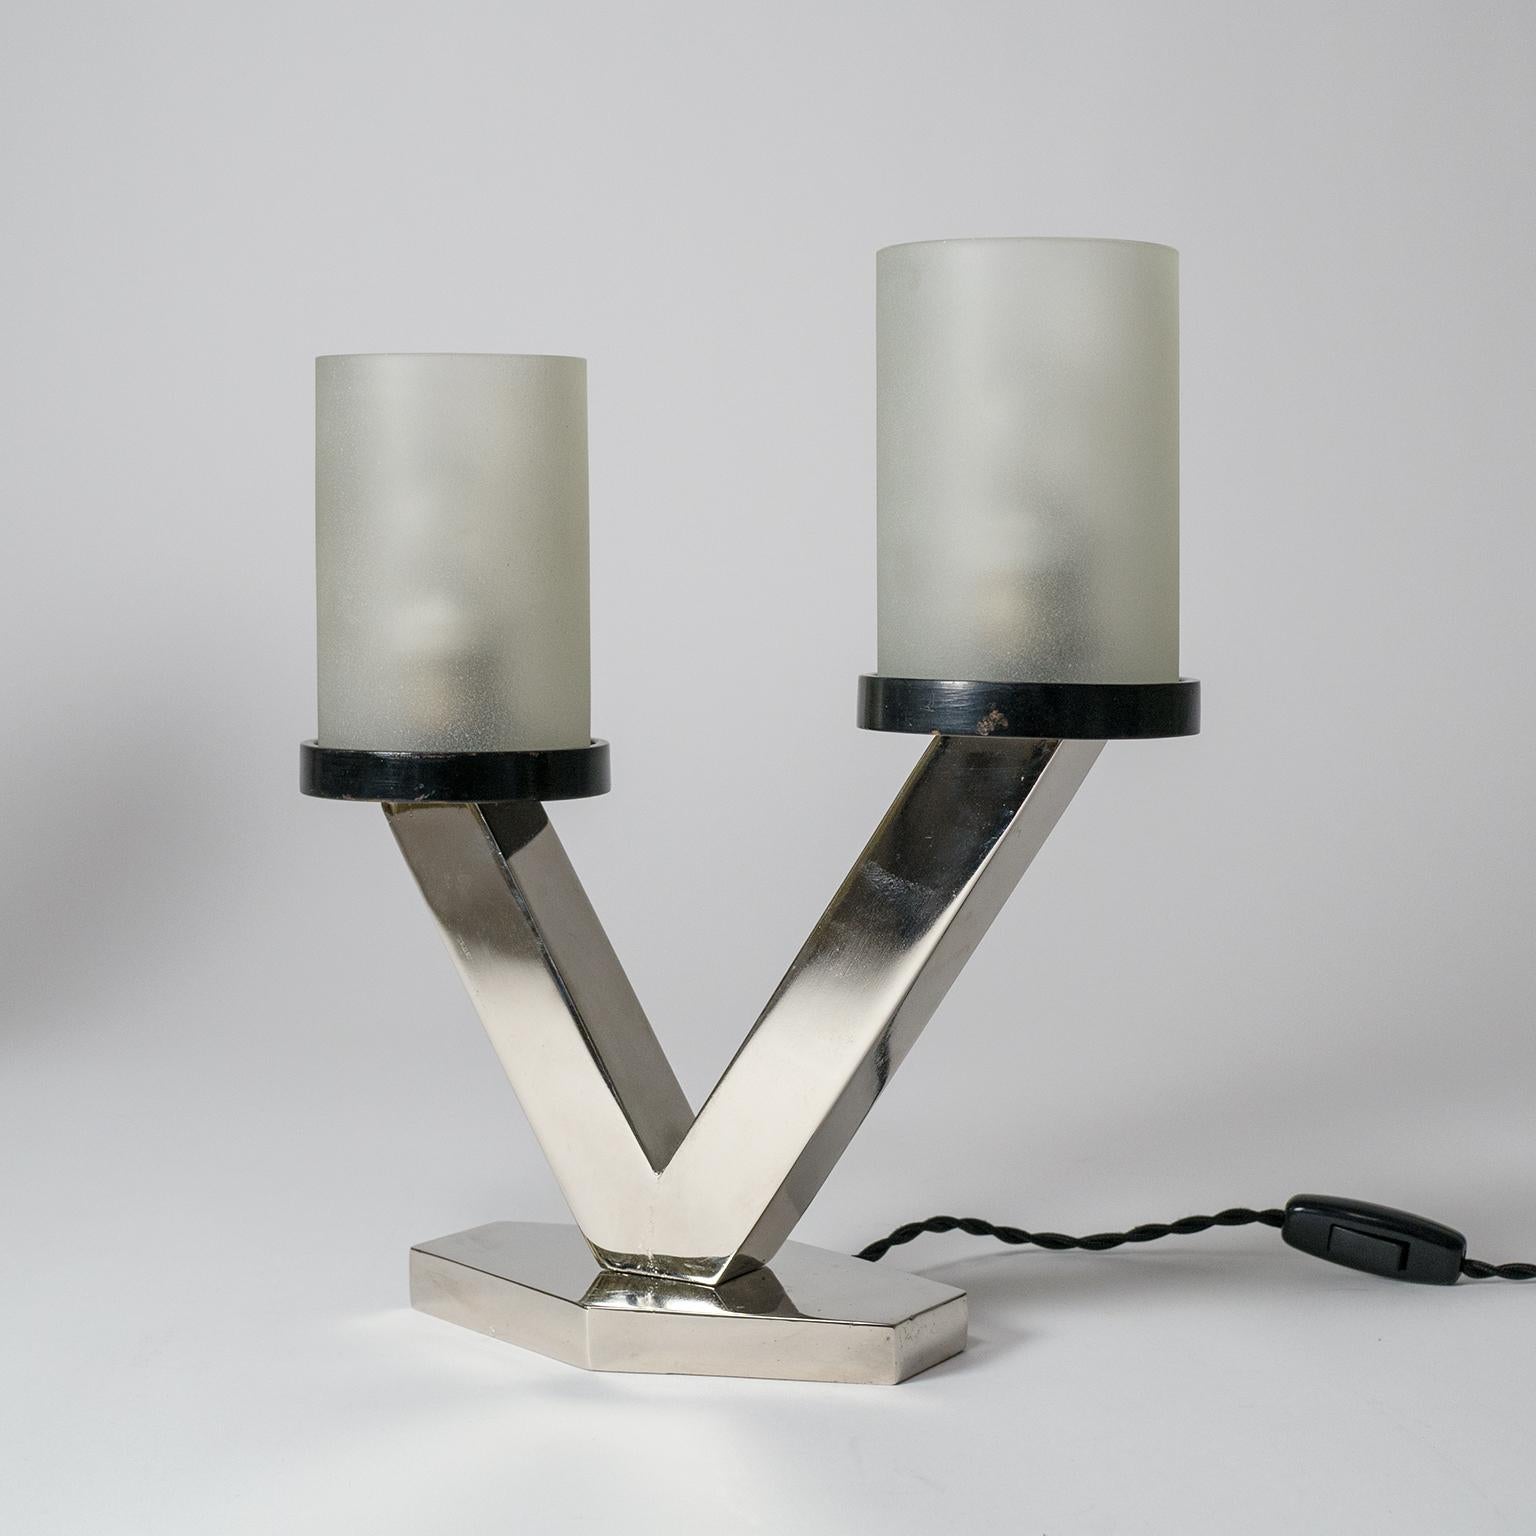 1920s Art Deco Table Lamps, Nickel and Glass 8